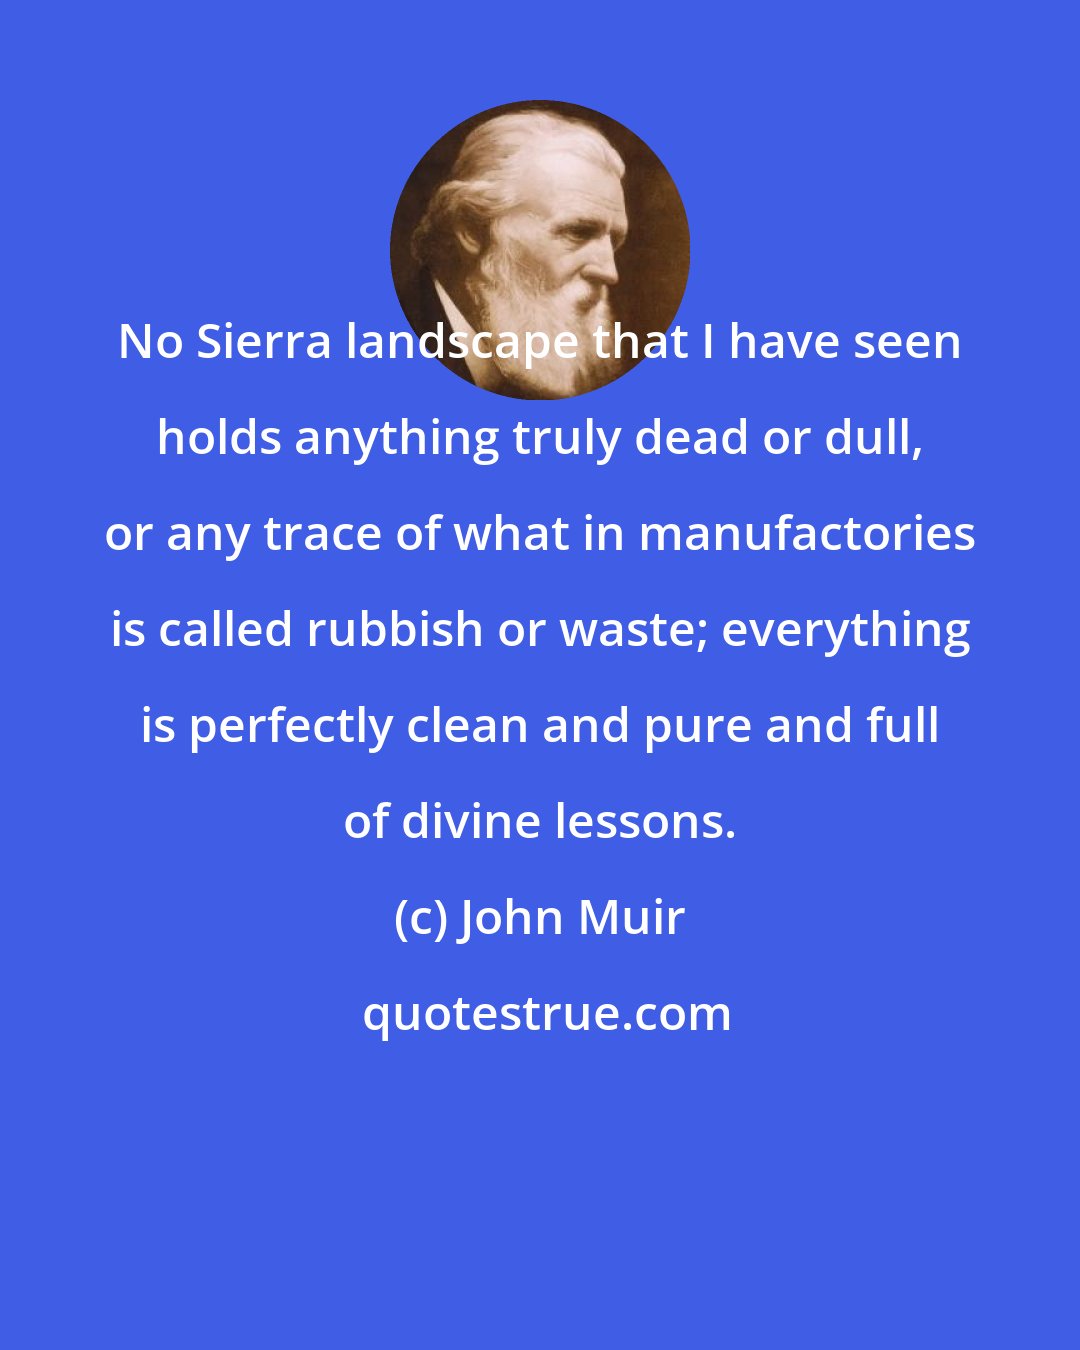 John Muir: No Sierra landscape that I have seen holds anything truly dead or dull, or any trace of what in manufactories is called rubbish or waste; everything is perfectly clean and pure and full of divine lessons.